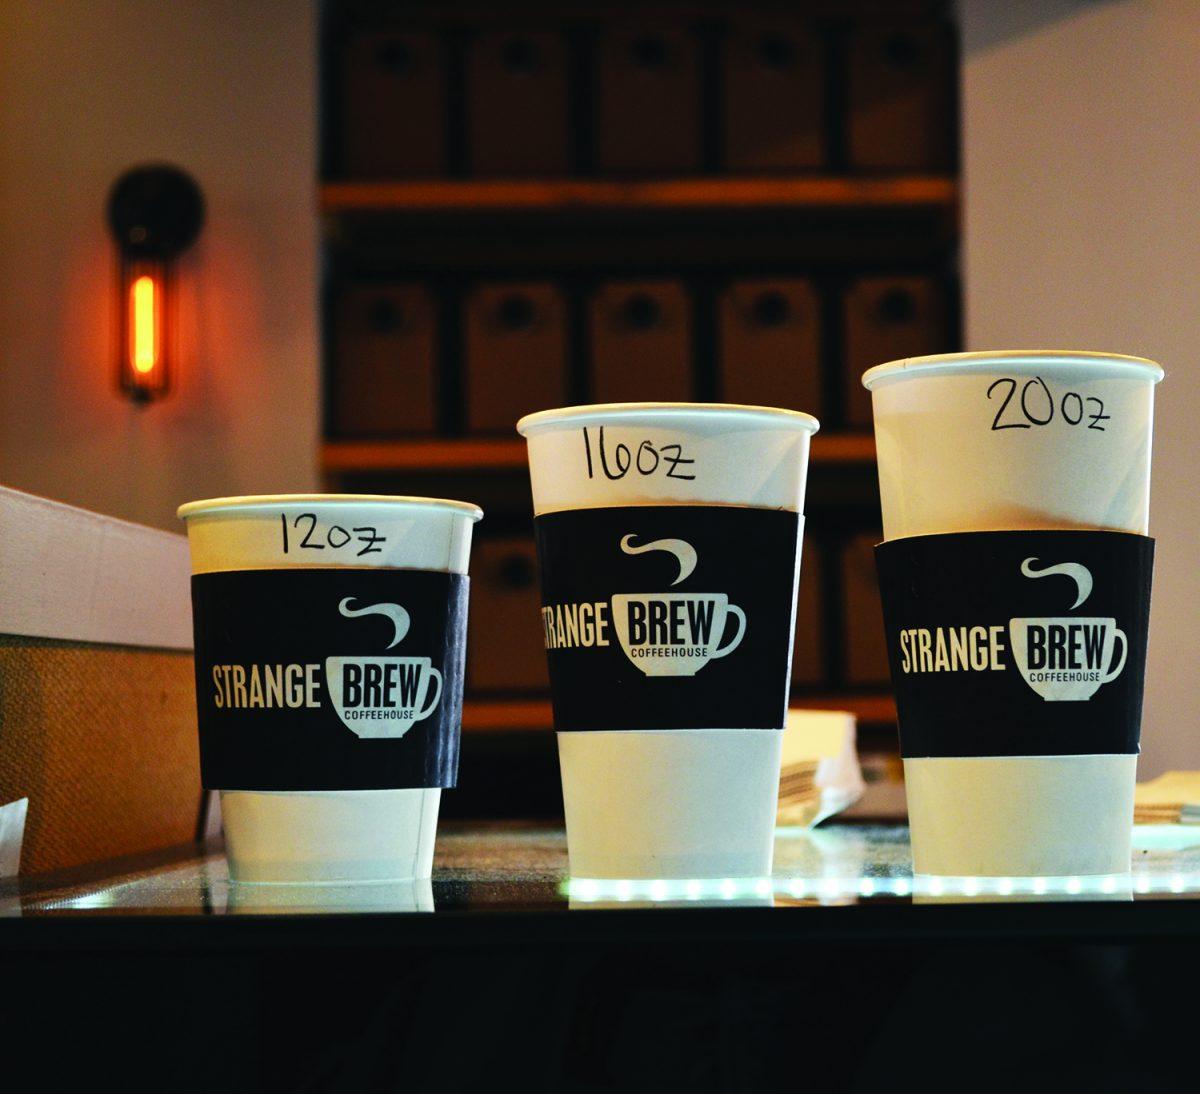 Local Starkville coffee shop Strange Brew is named one of 10 finalists in the first ever “MGW Employer Services Business Game Changer” contest put on by Mississippi State Athletics.